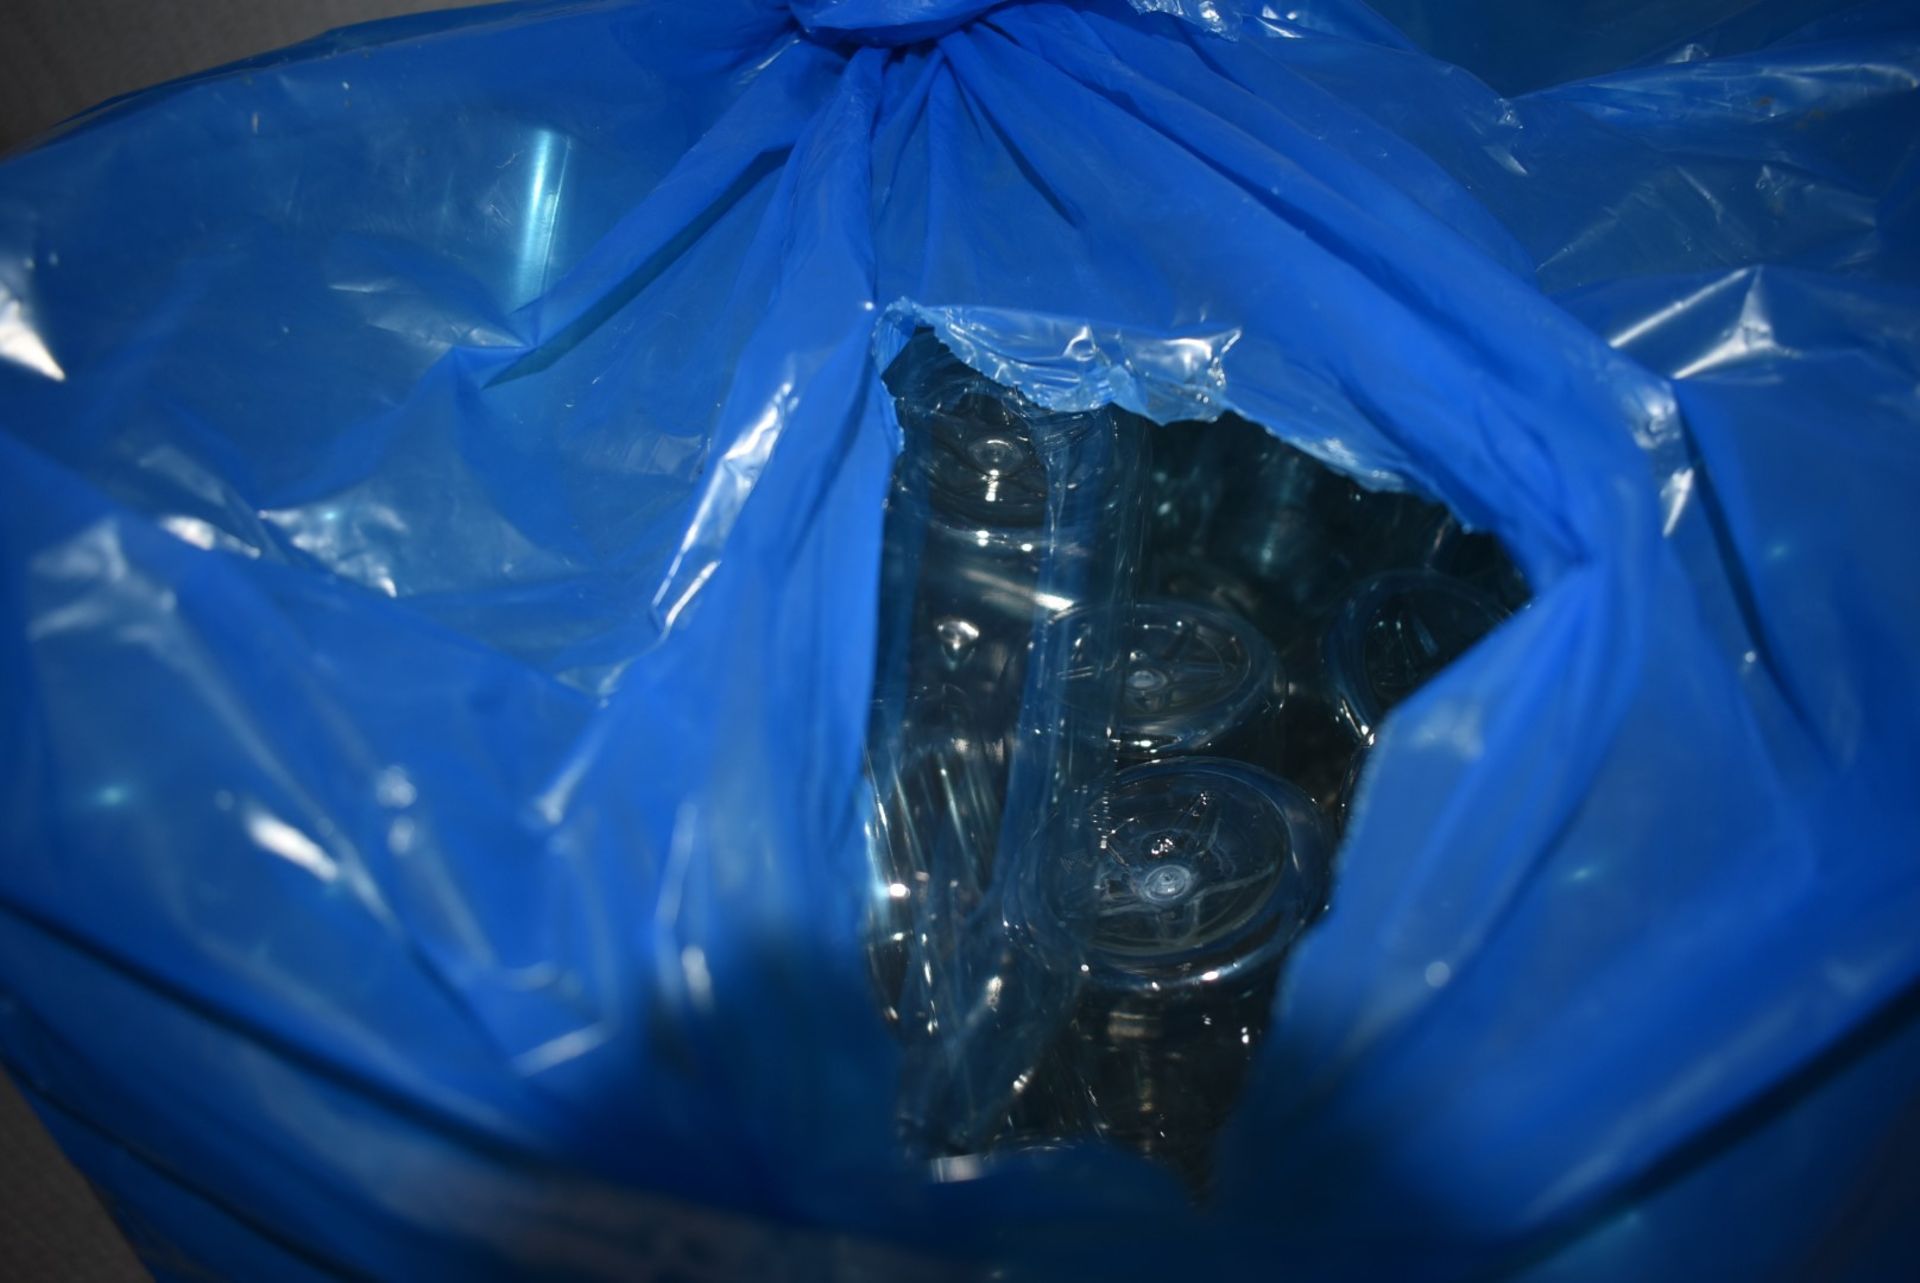 1 x Large Bag of Unused Plastic Bottles - Recently Removed From a Vegan Deli - CL999 - Ref: SL190 - Image 6 of 6